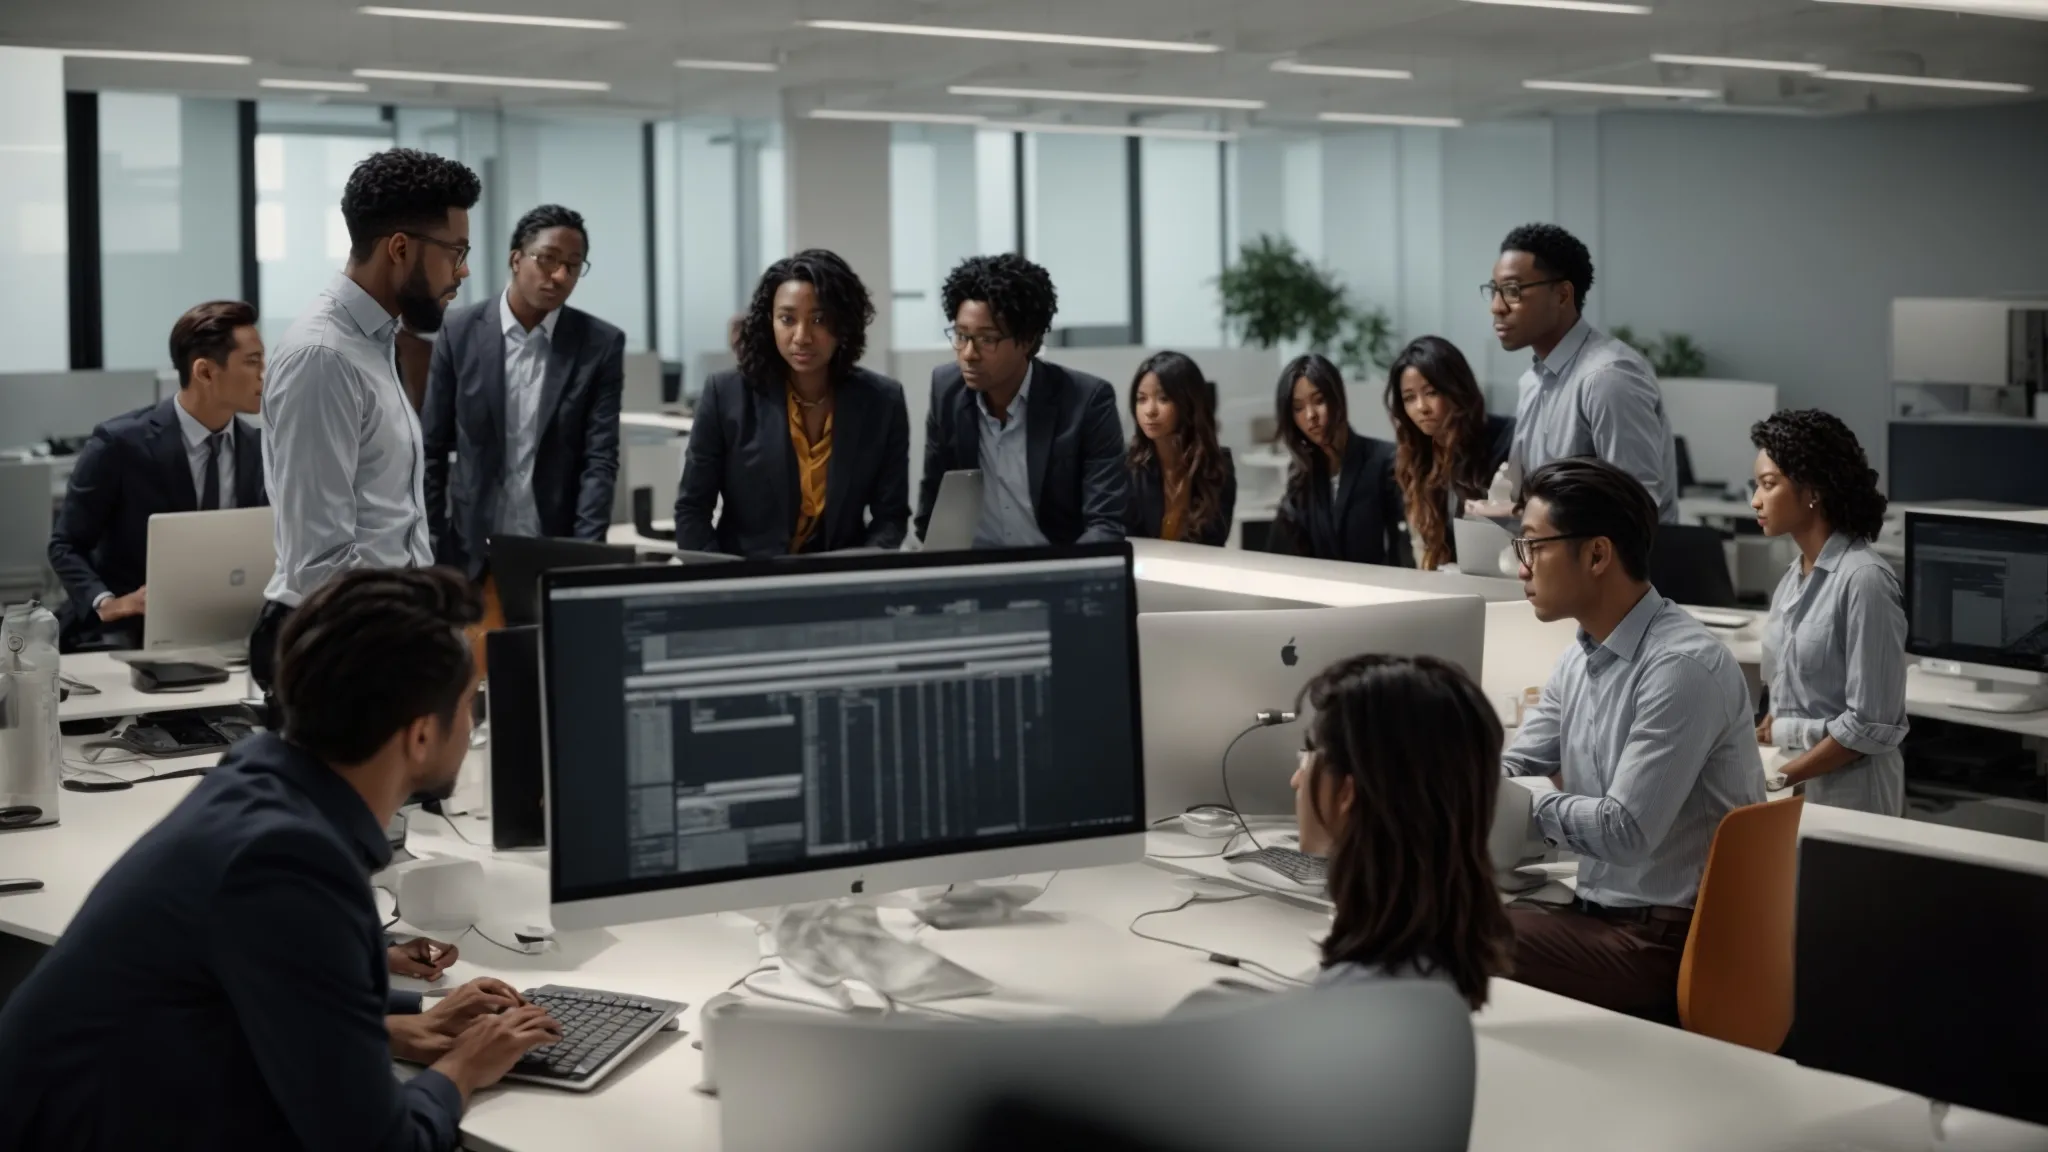 a group of professionals gathered around a computer, discussing strategies in a modern office setting.